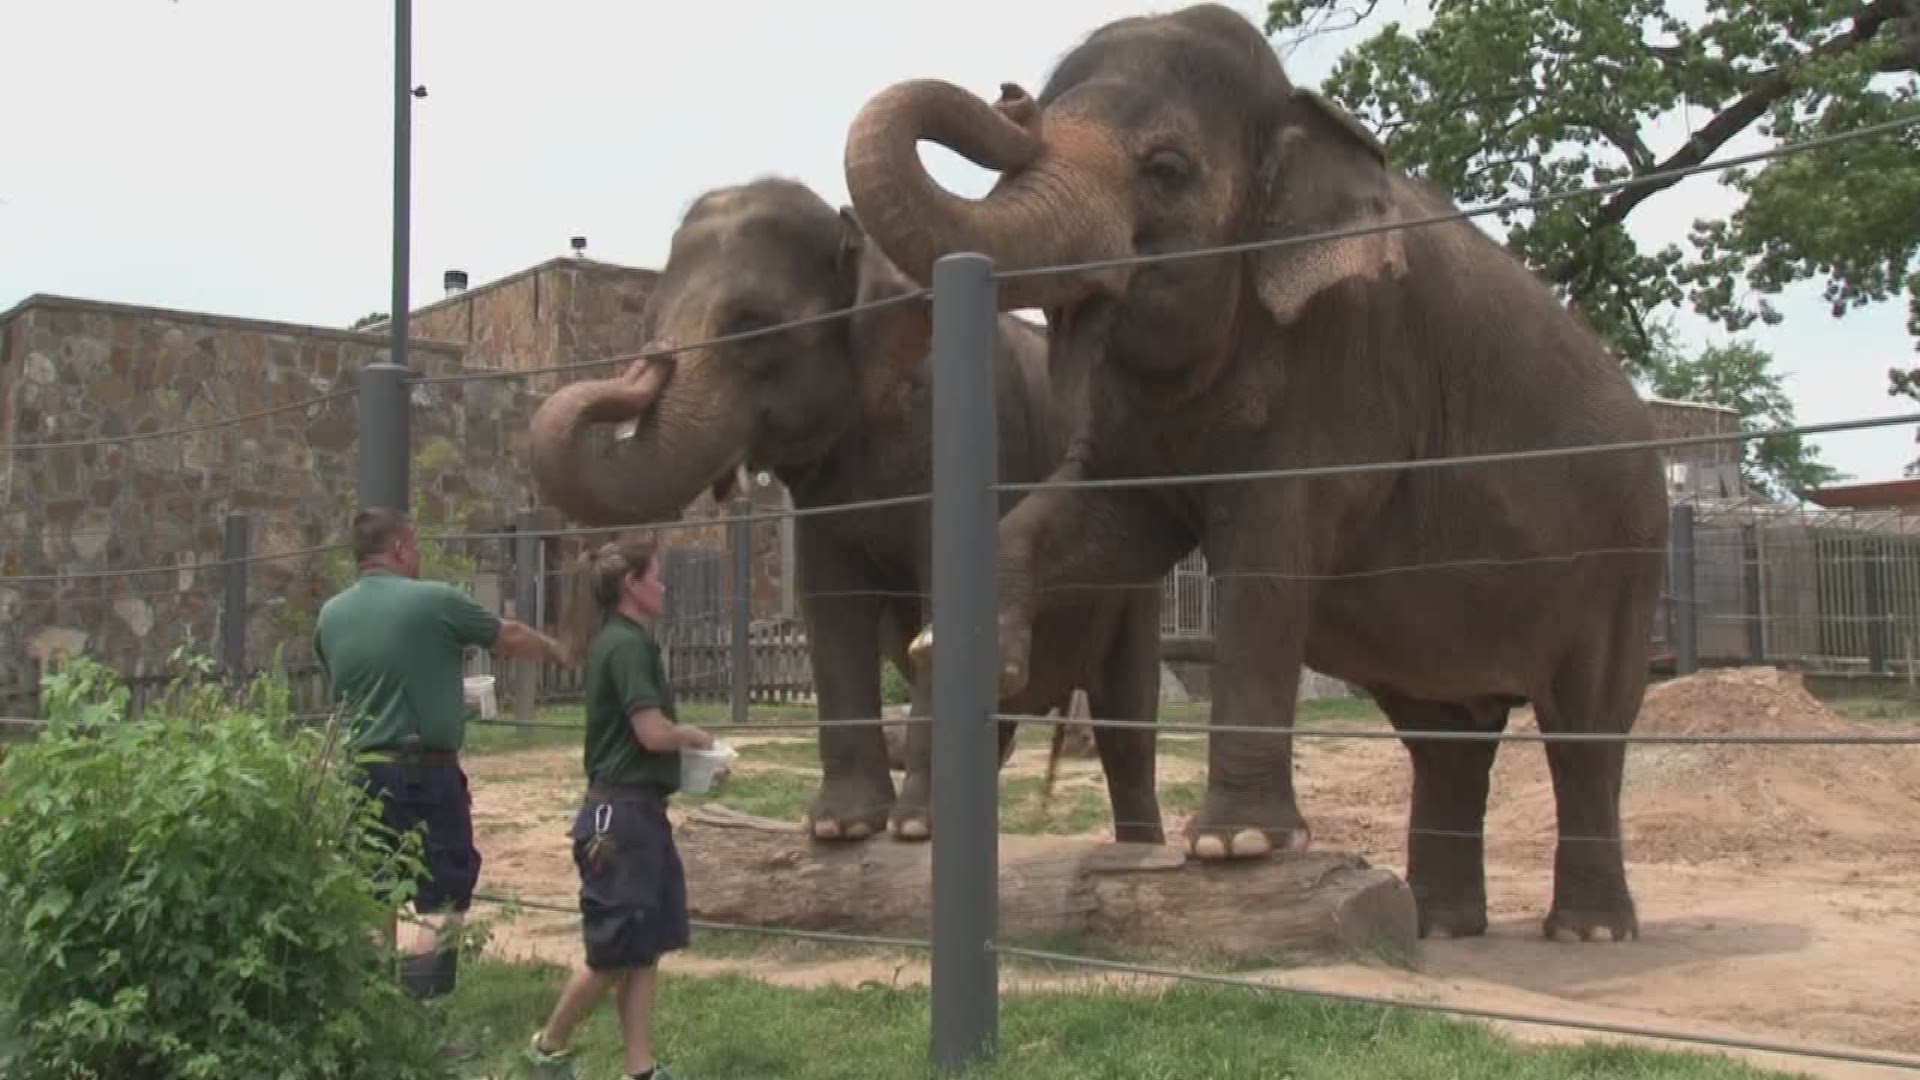 The staff at the Little Rock Zoo keeps the elephants exercised and stretched so they can live out their golden years in peace.